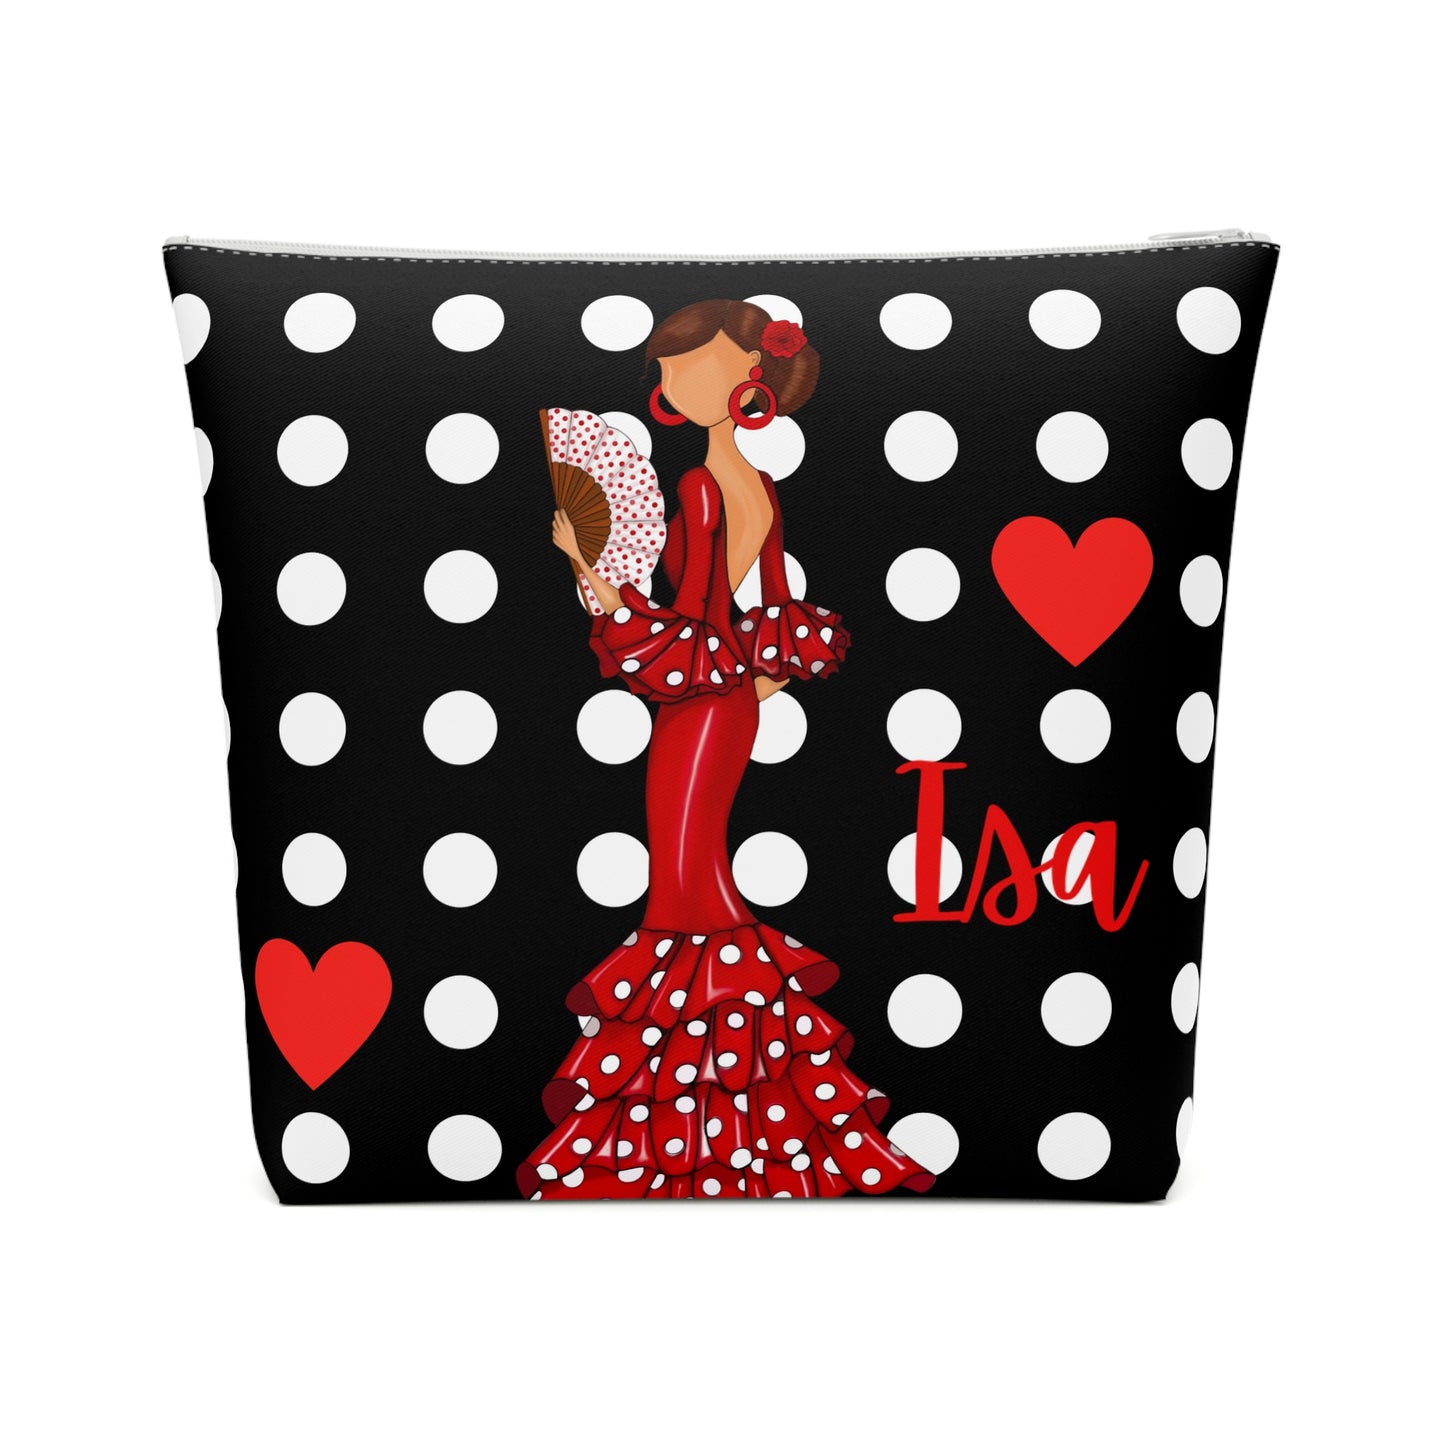 a black and white polka dot bag with a woman in a red dress